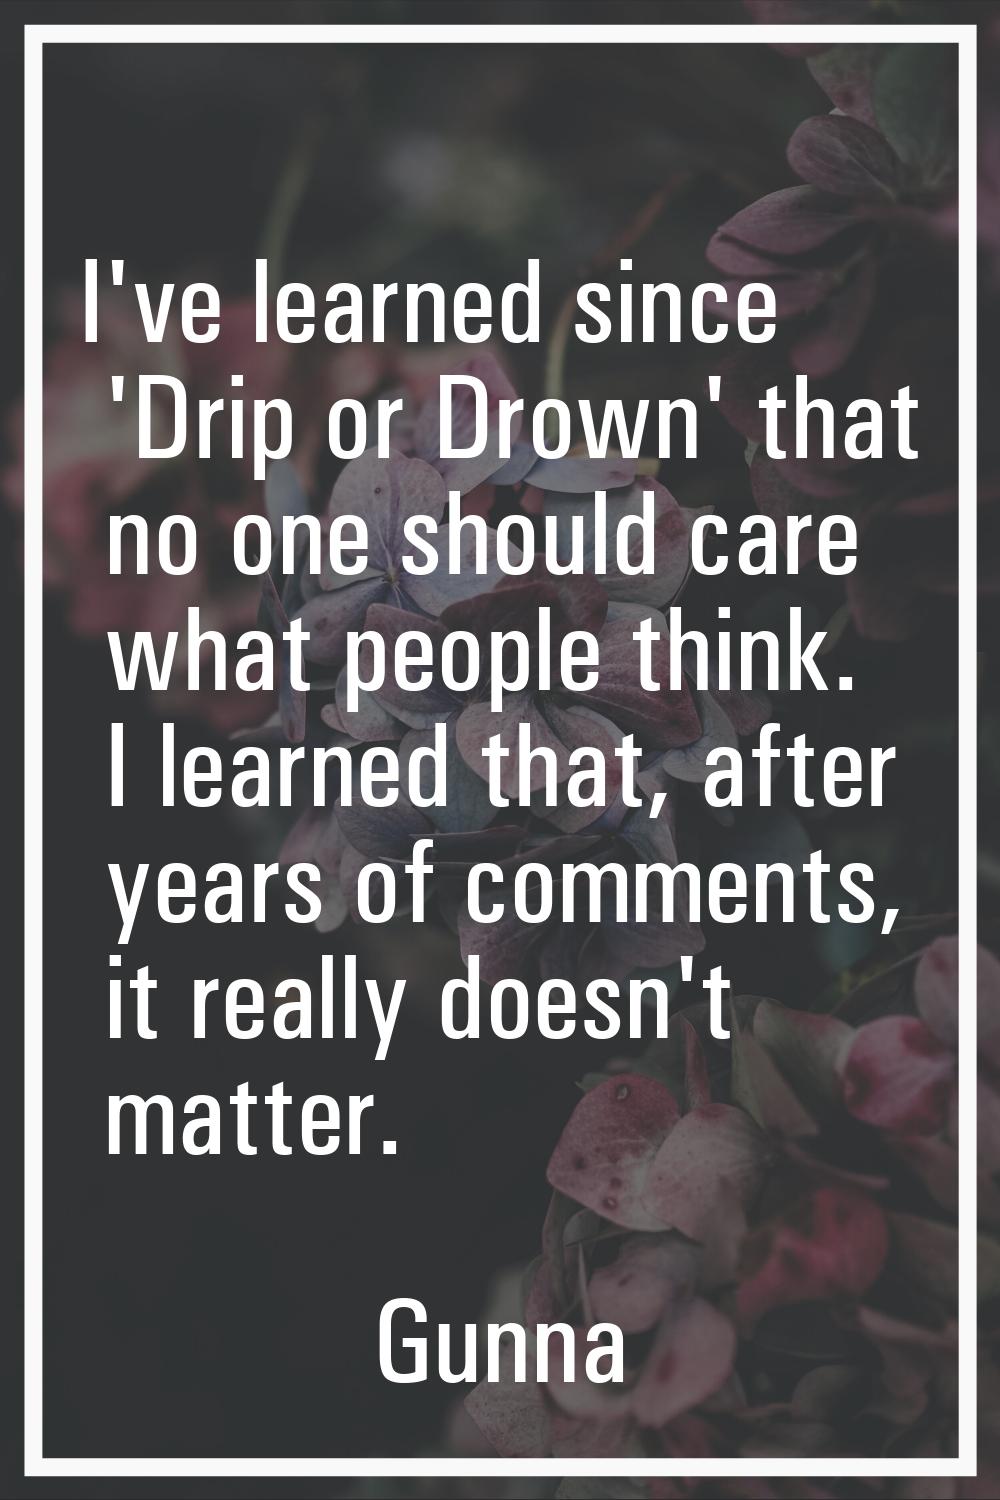 I've learned since 'Drip or Drown' that no one should care what people think. I learned that, after